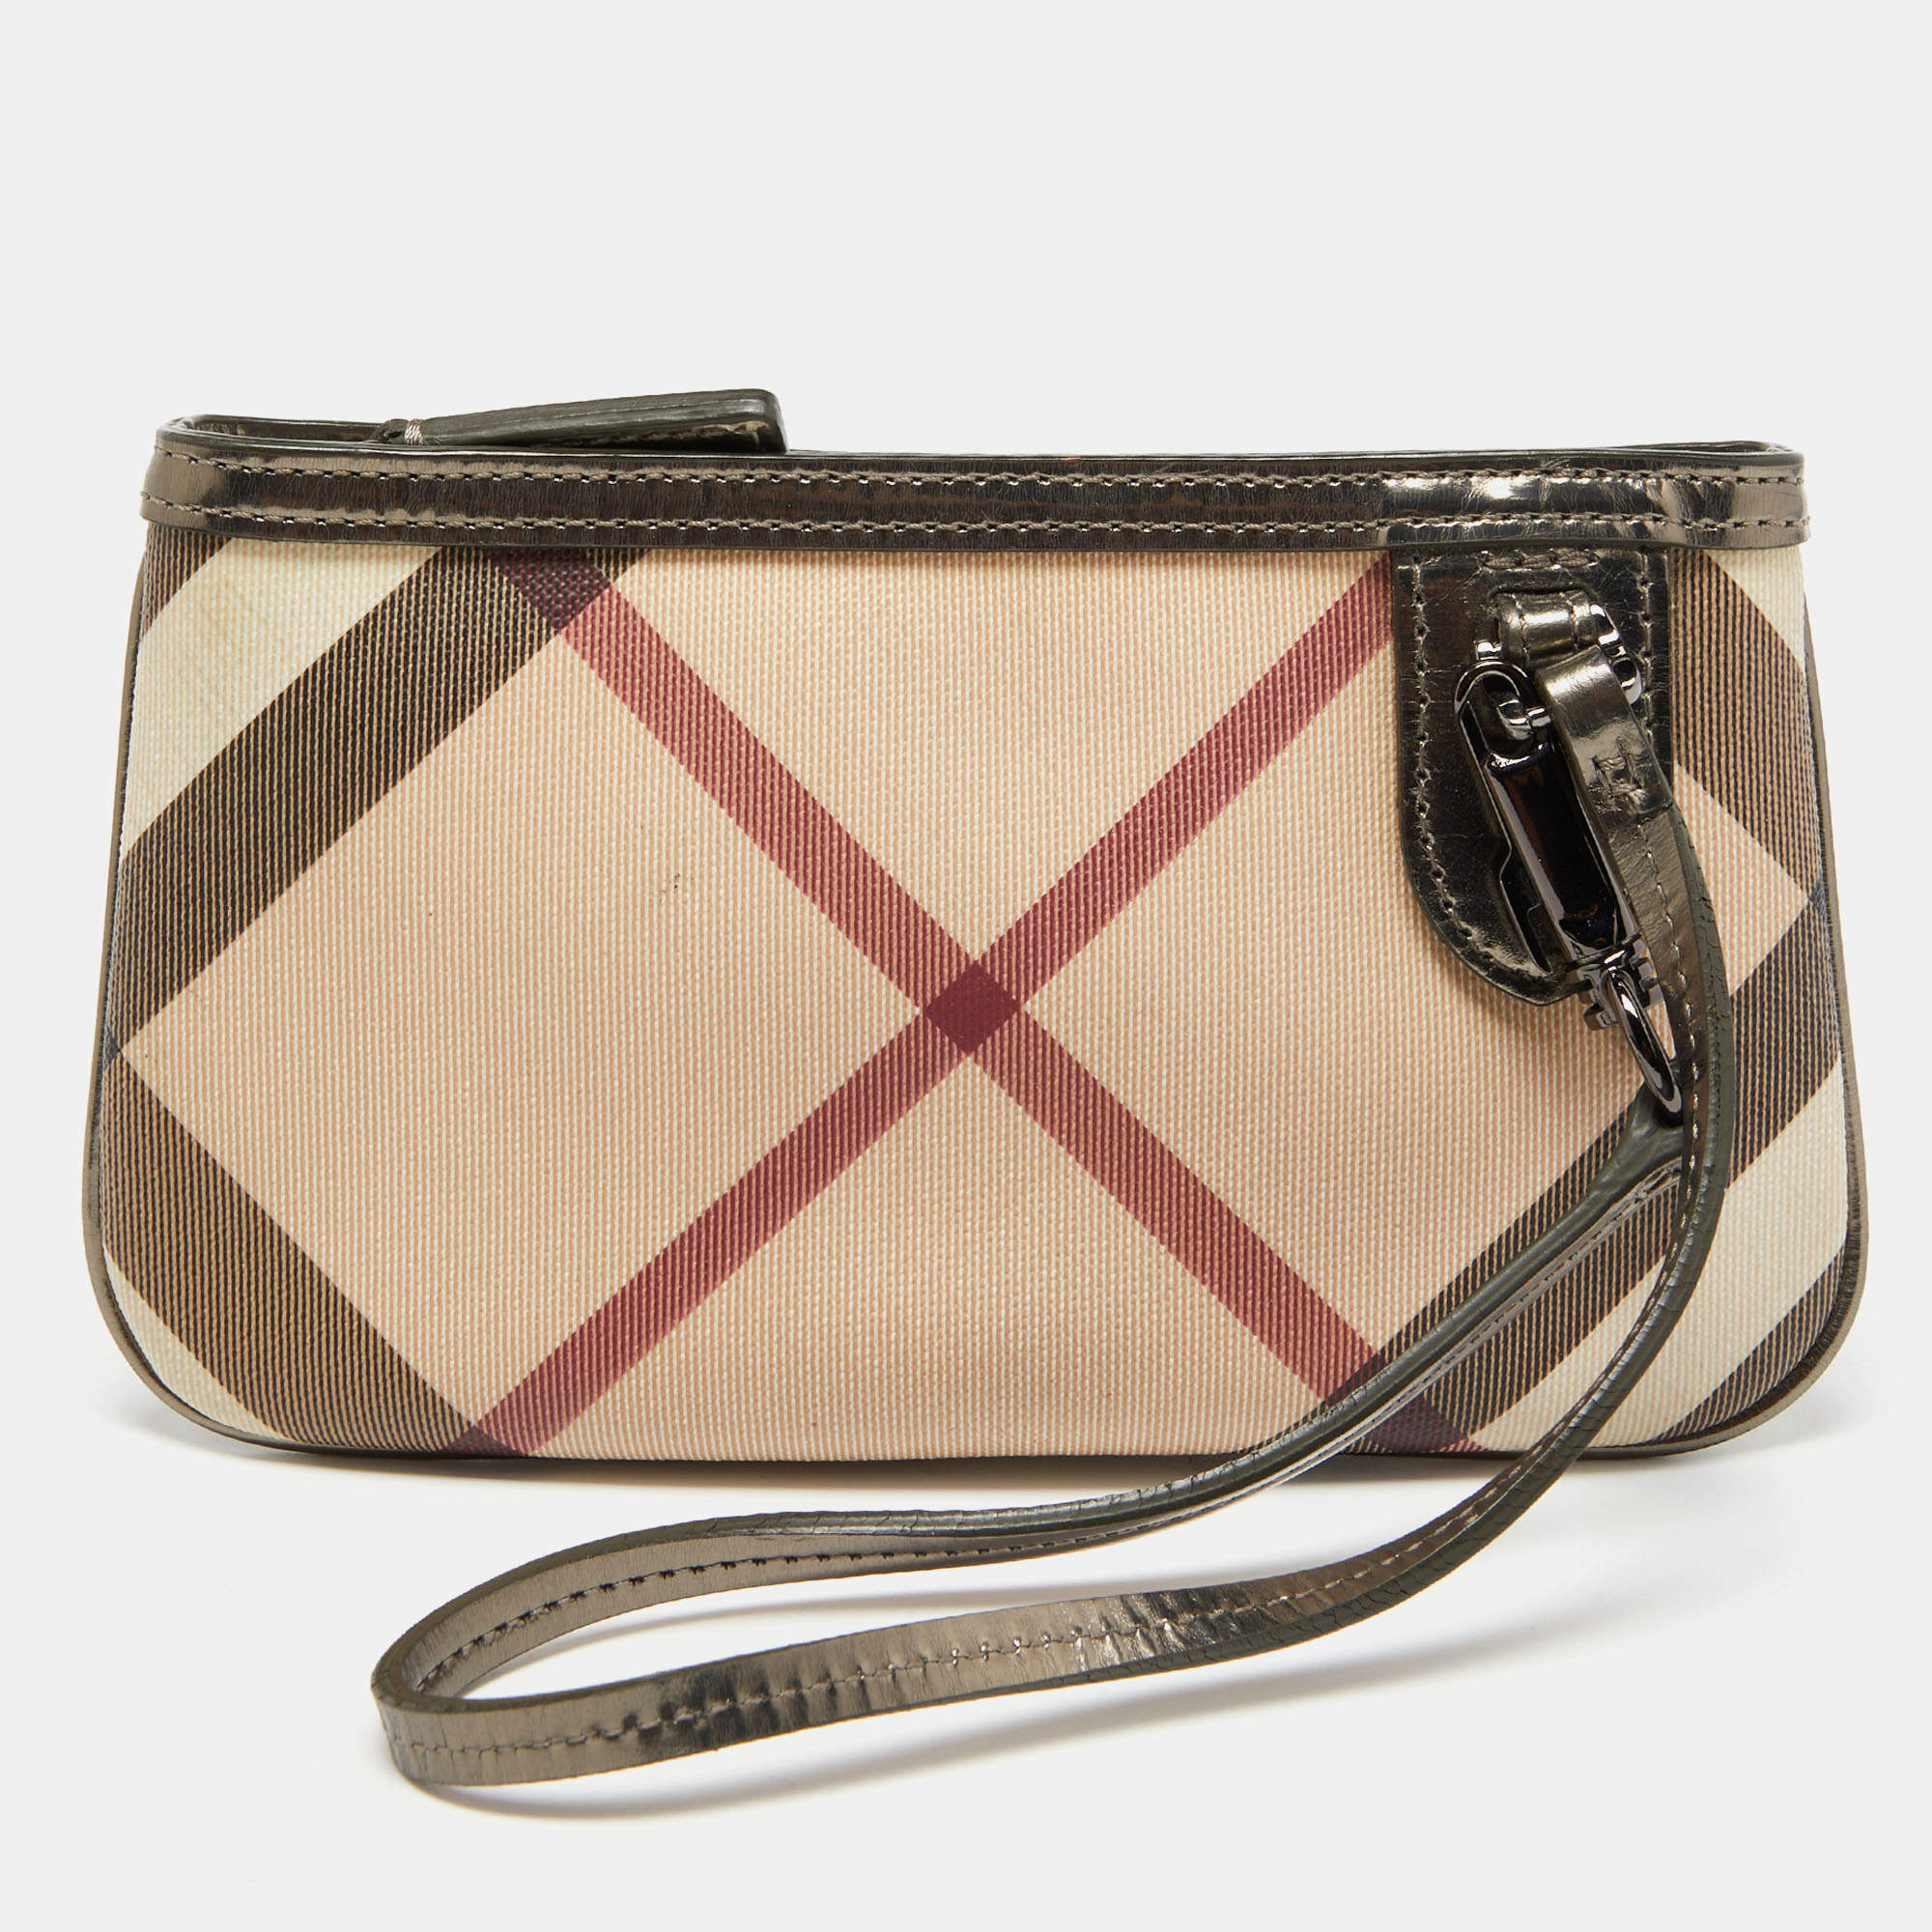 Patent leather wallet Burberry Beige in Patent leather - 33360491